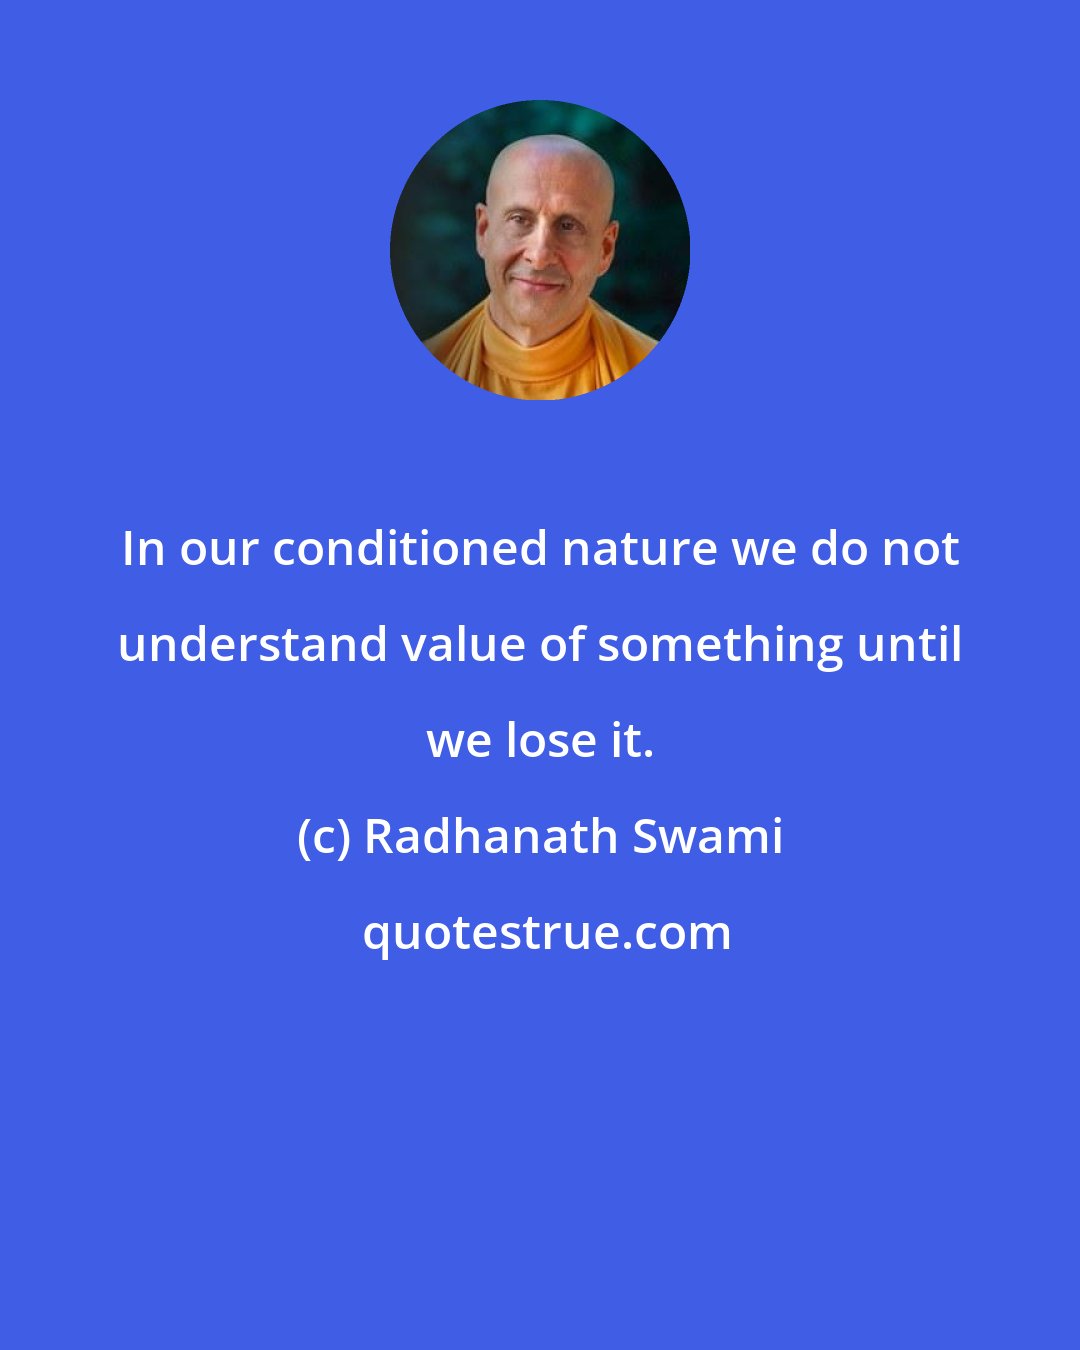 Radhanath Swami: In our conditioned nature we do not understand value of something until we lose it.